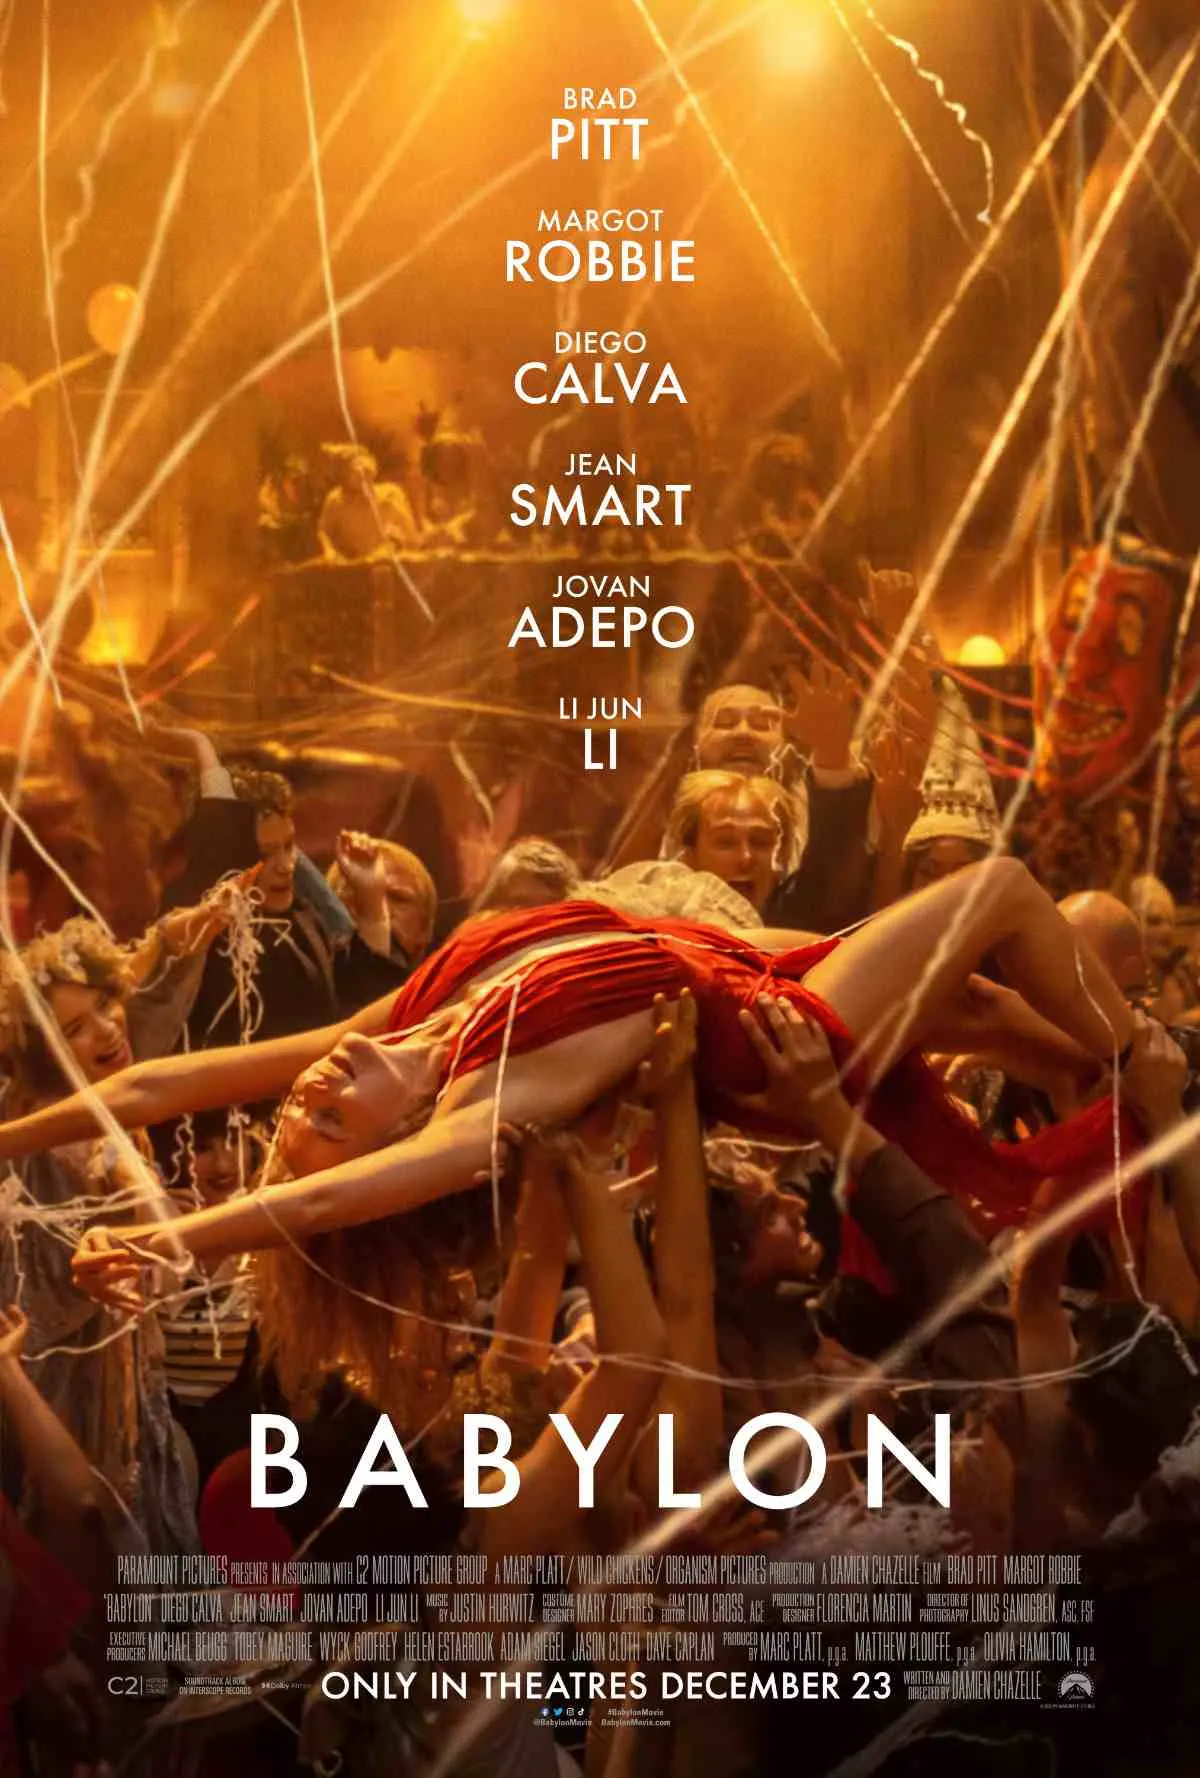 Naughty or Nice Trailers for Babylon Debut